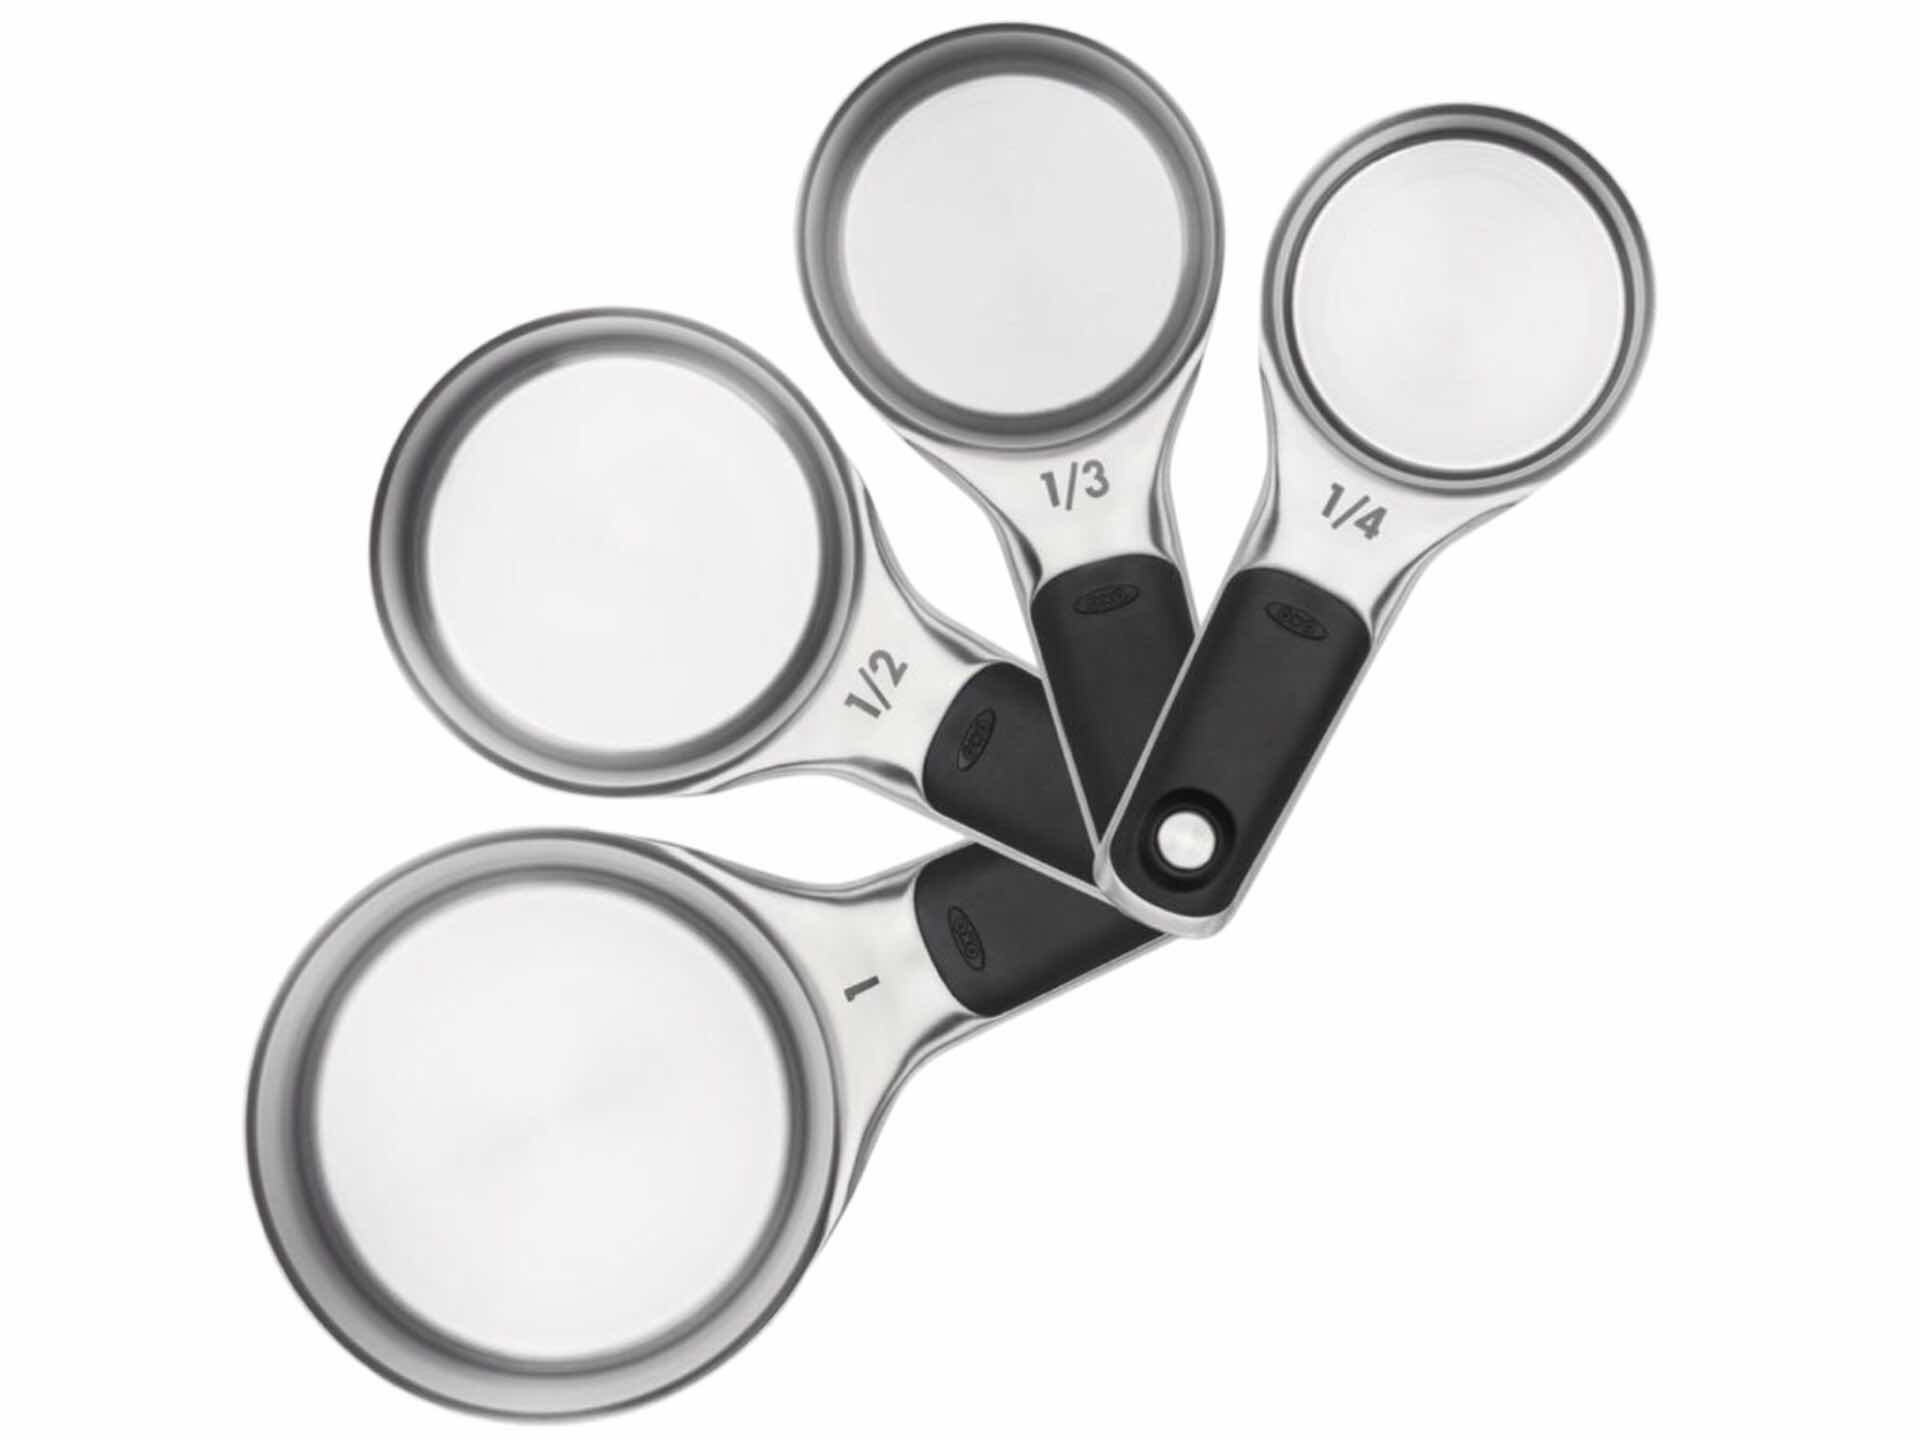 oxo-good-grips-stainless-steel-magnetic-measuring-cups